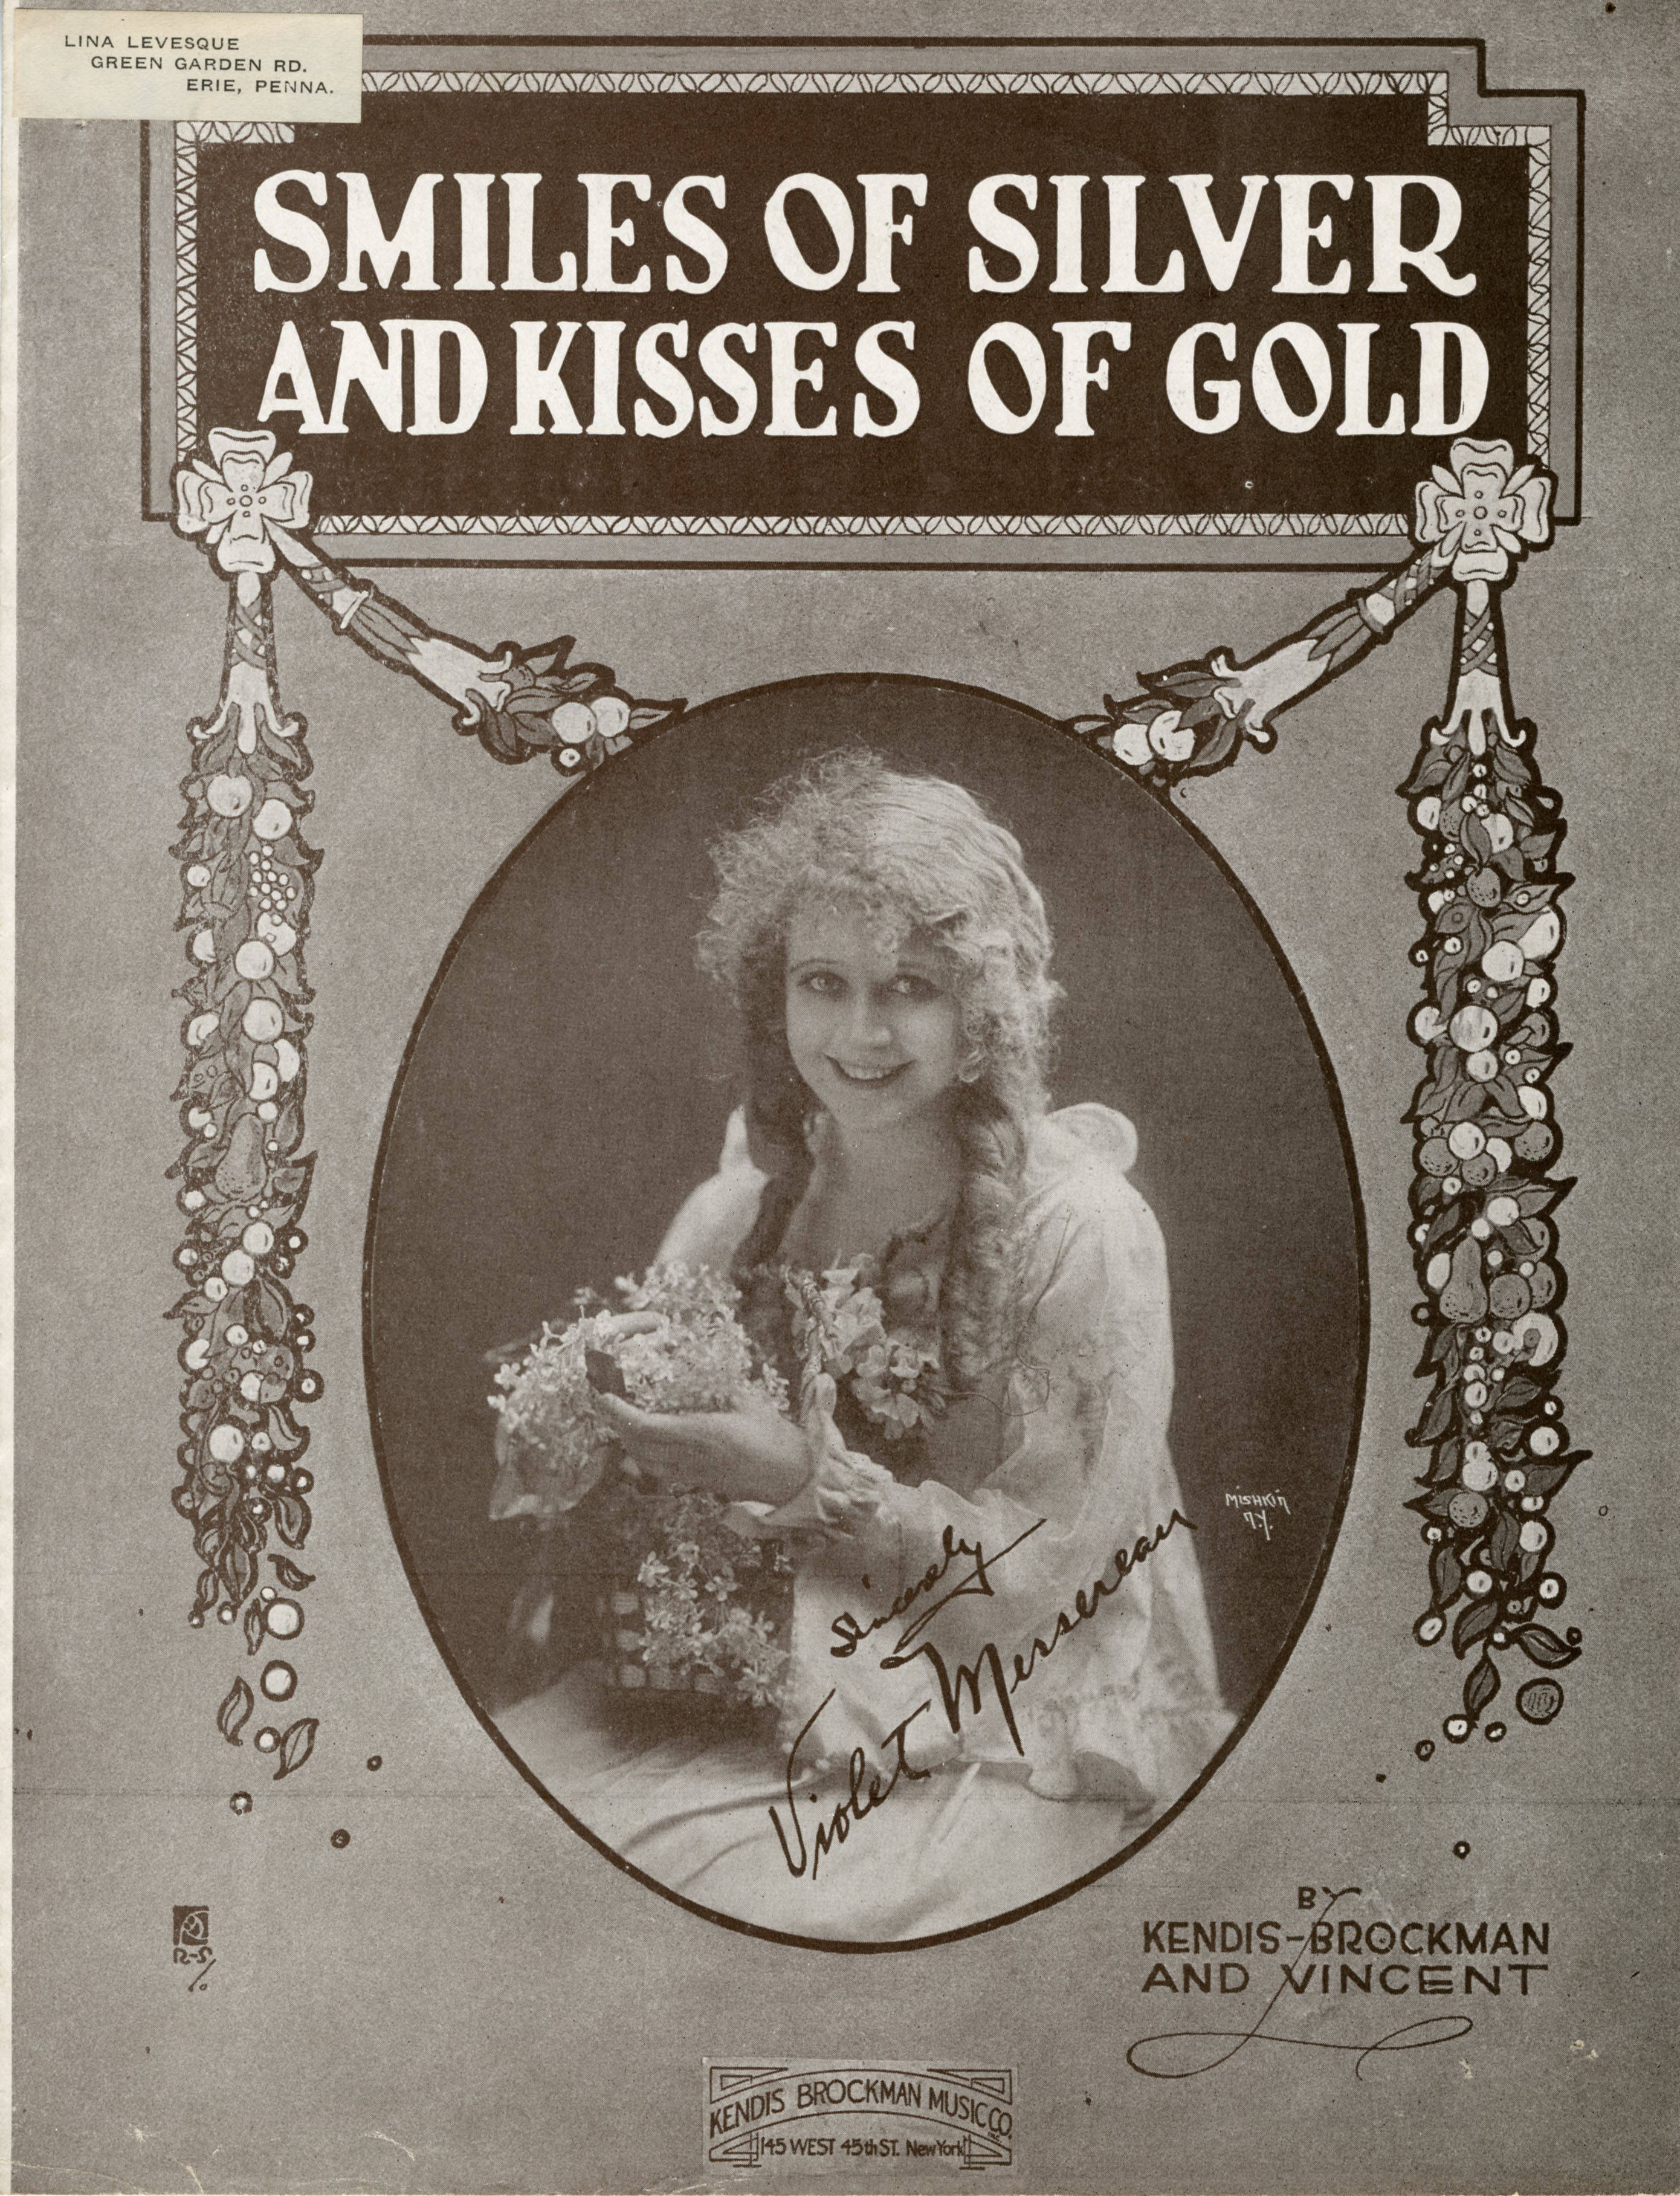 Sheet music cover - SMILES OF SILVER AND KISSES OF GOLD (1919)